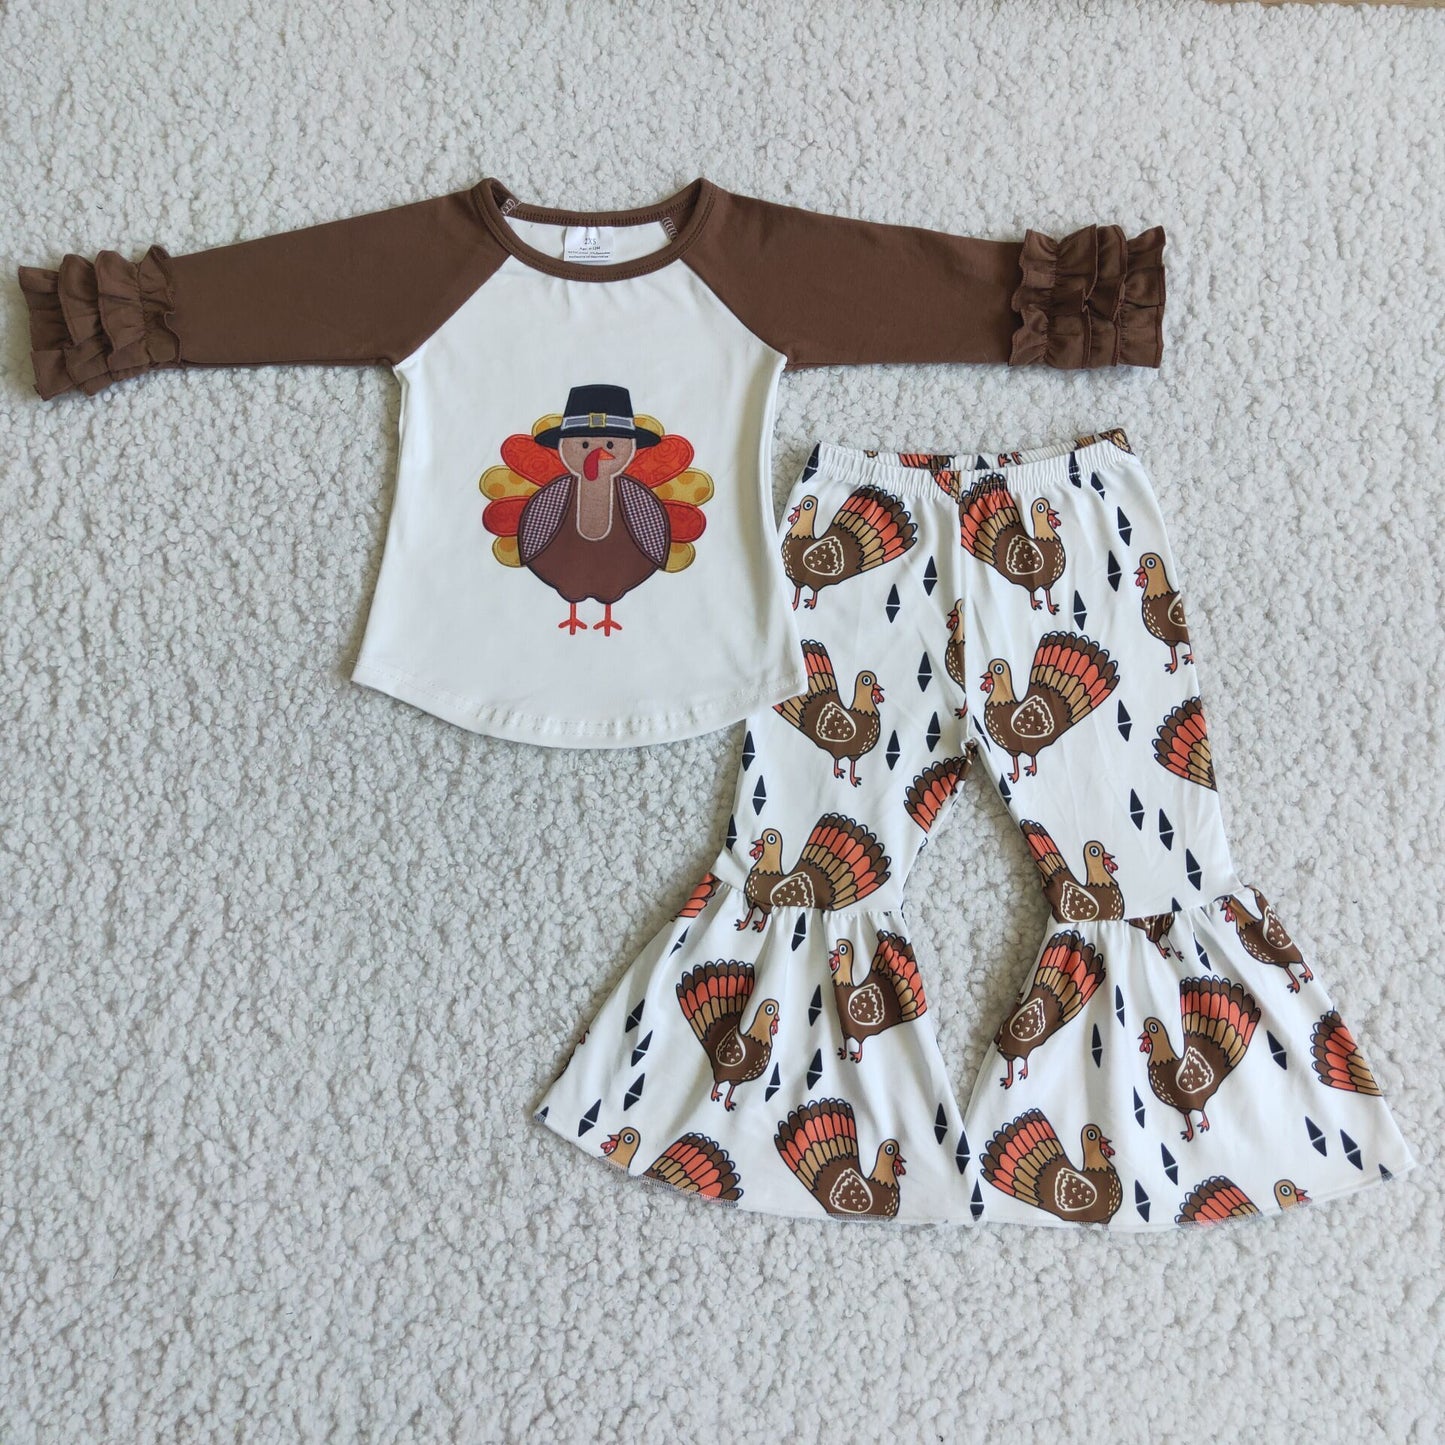 (Promotion) 6 A23-19 Turkey print girls Thanksgiving outfits